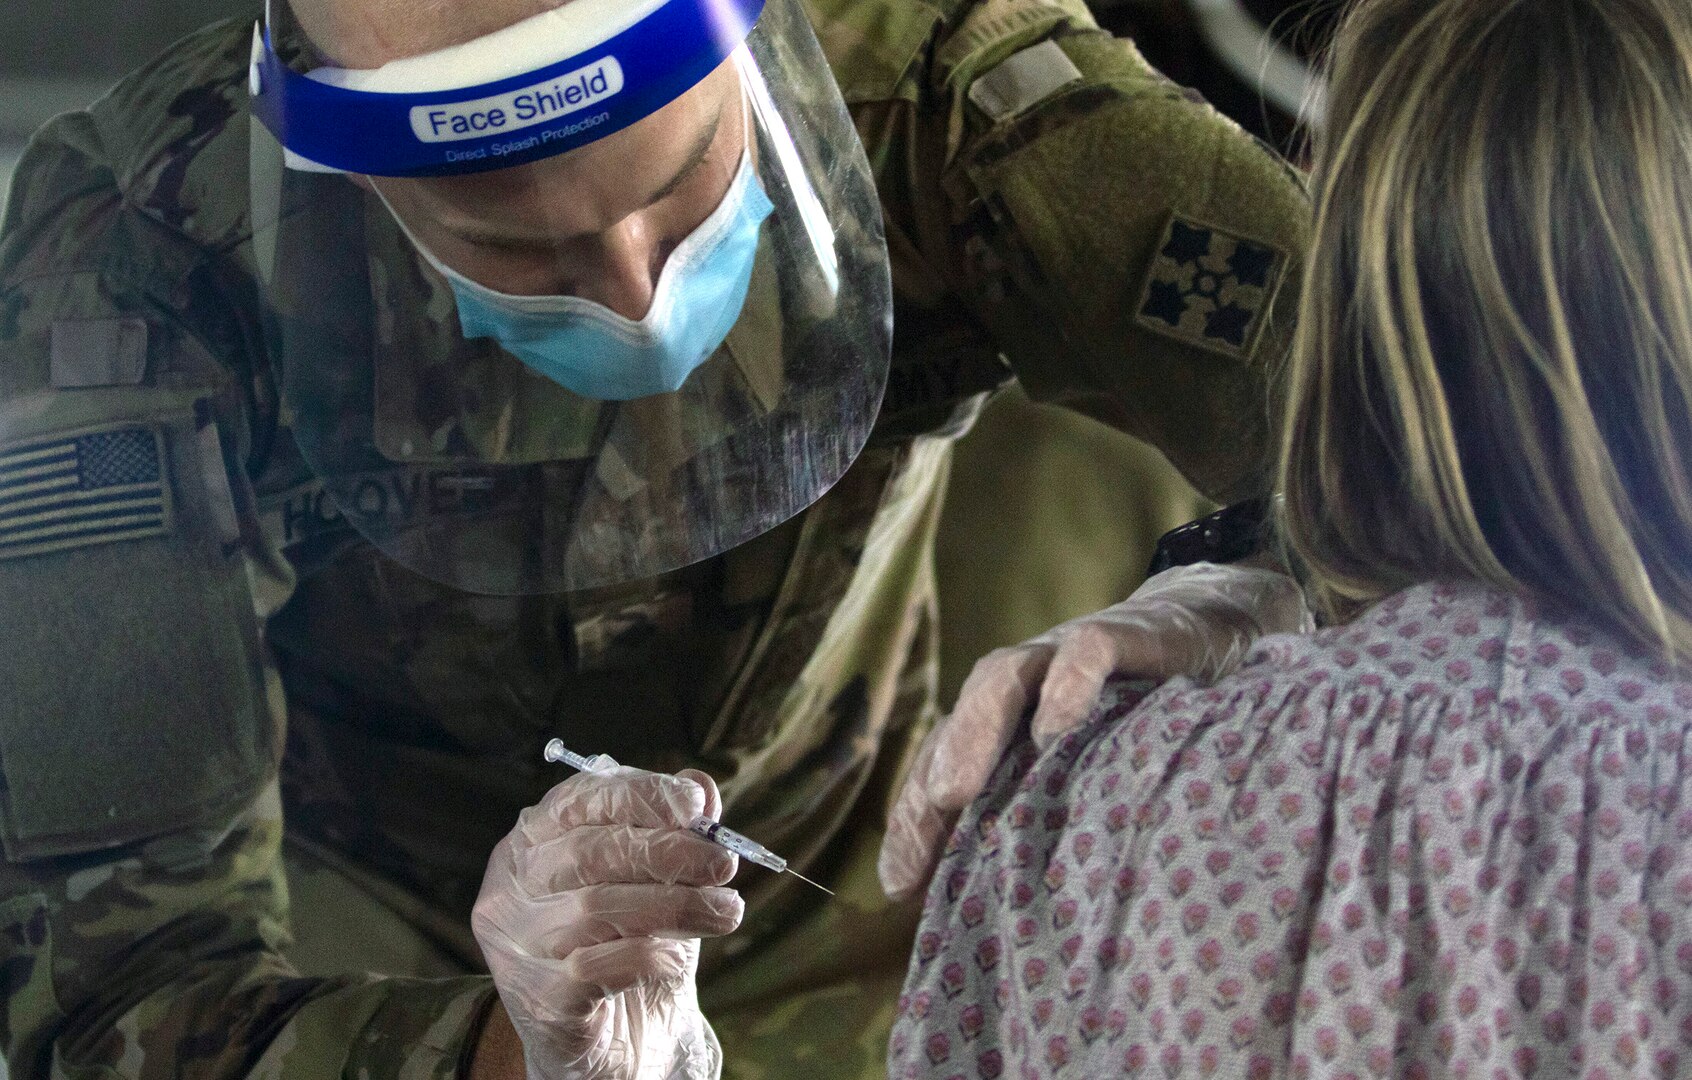 U.S. Army Spc. Jeb Hoover, assigned to the 4th Infantry Division, Fort Carson, Colorado, vaccinates a California community member at the walk-up vaccination site at California State University Los Angeles in California Feb. 20.